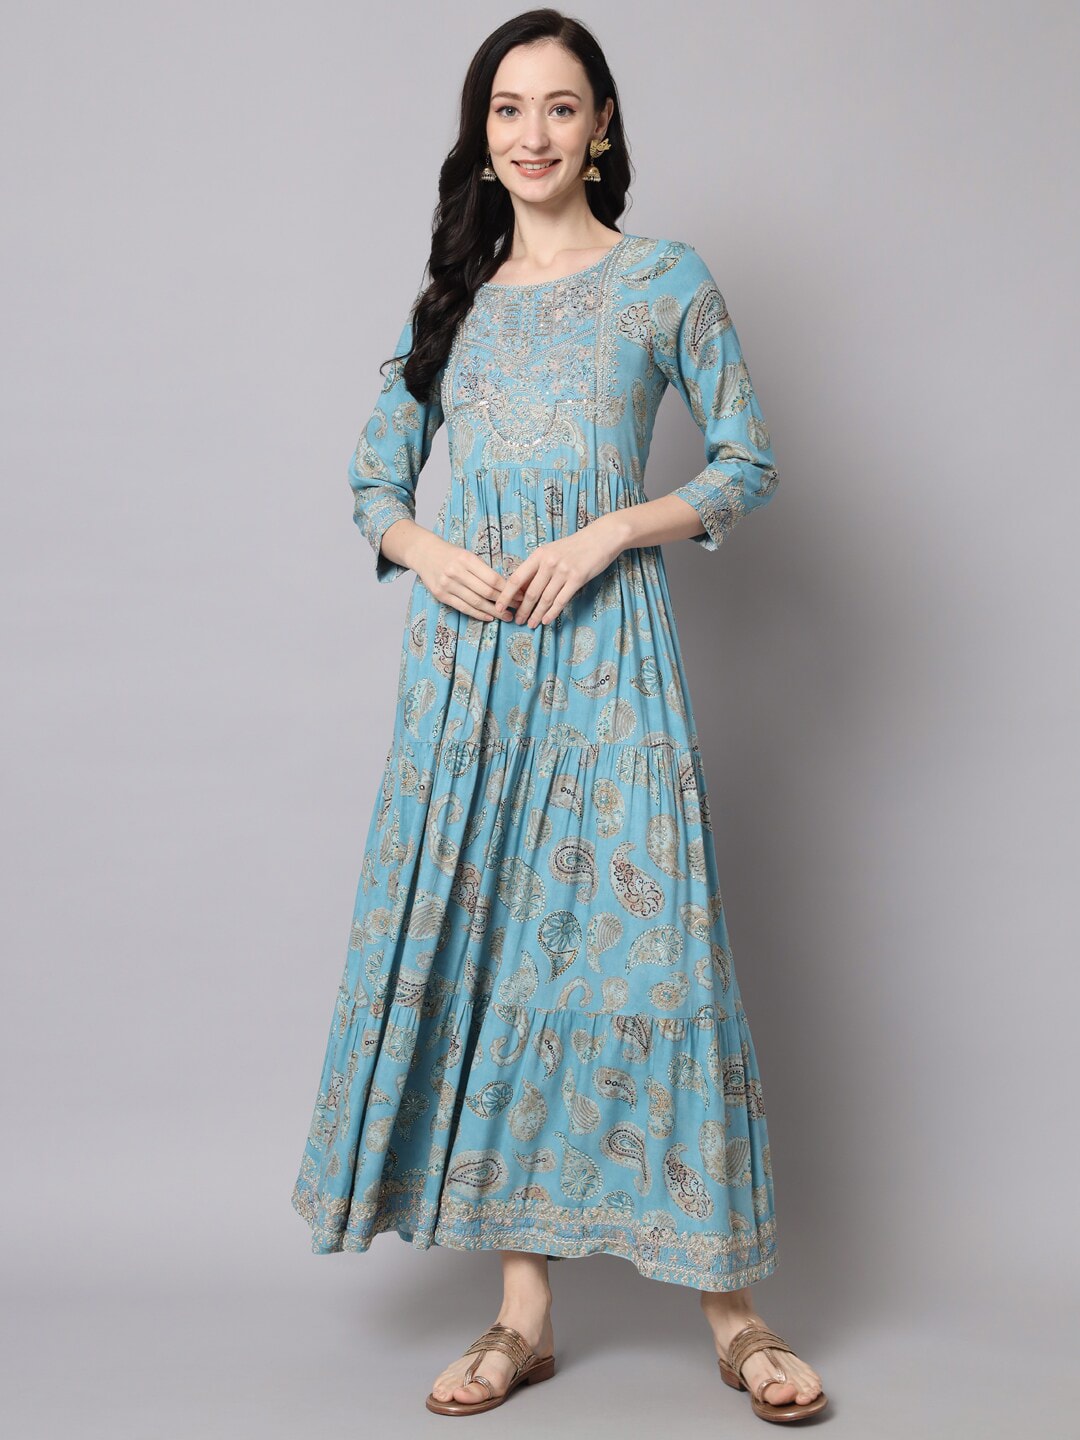 KALINI Turquoise Blue Floral Ethnic Maxi Dress Price in India